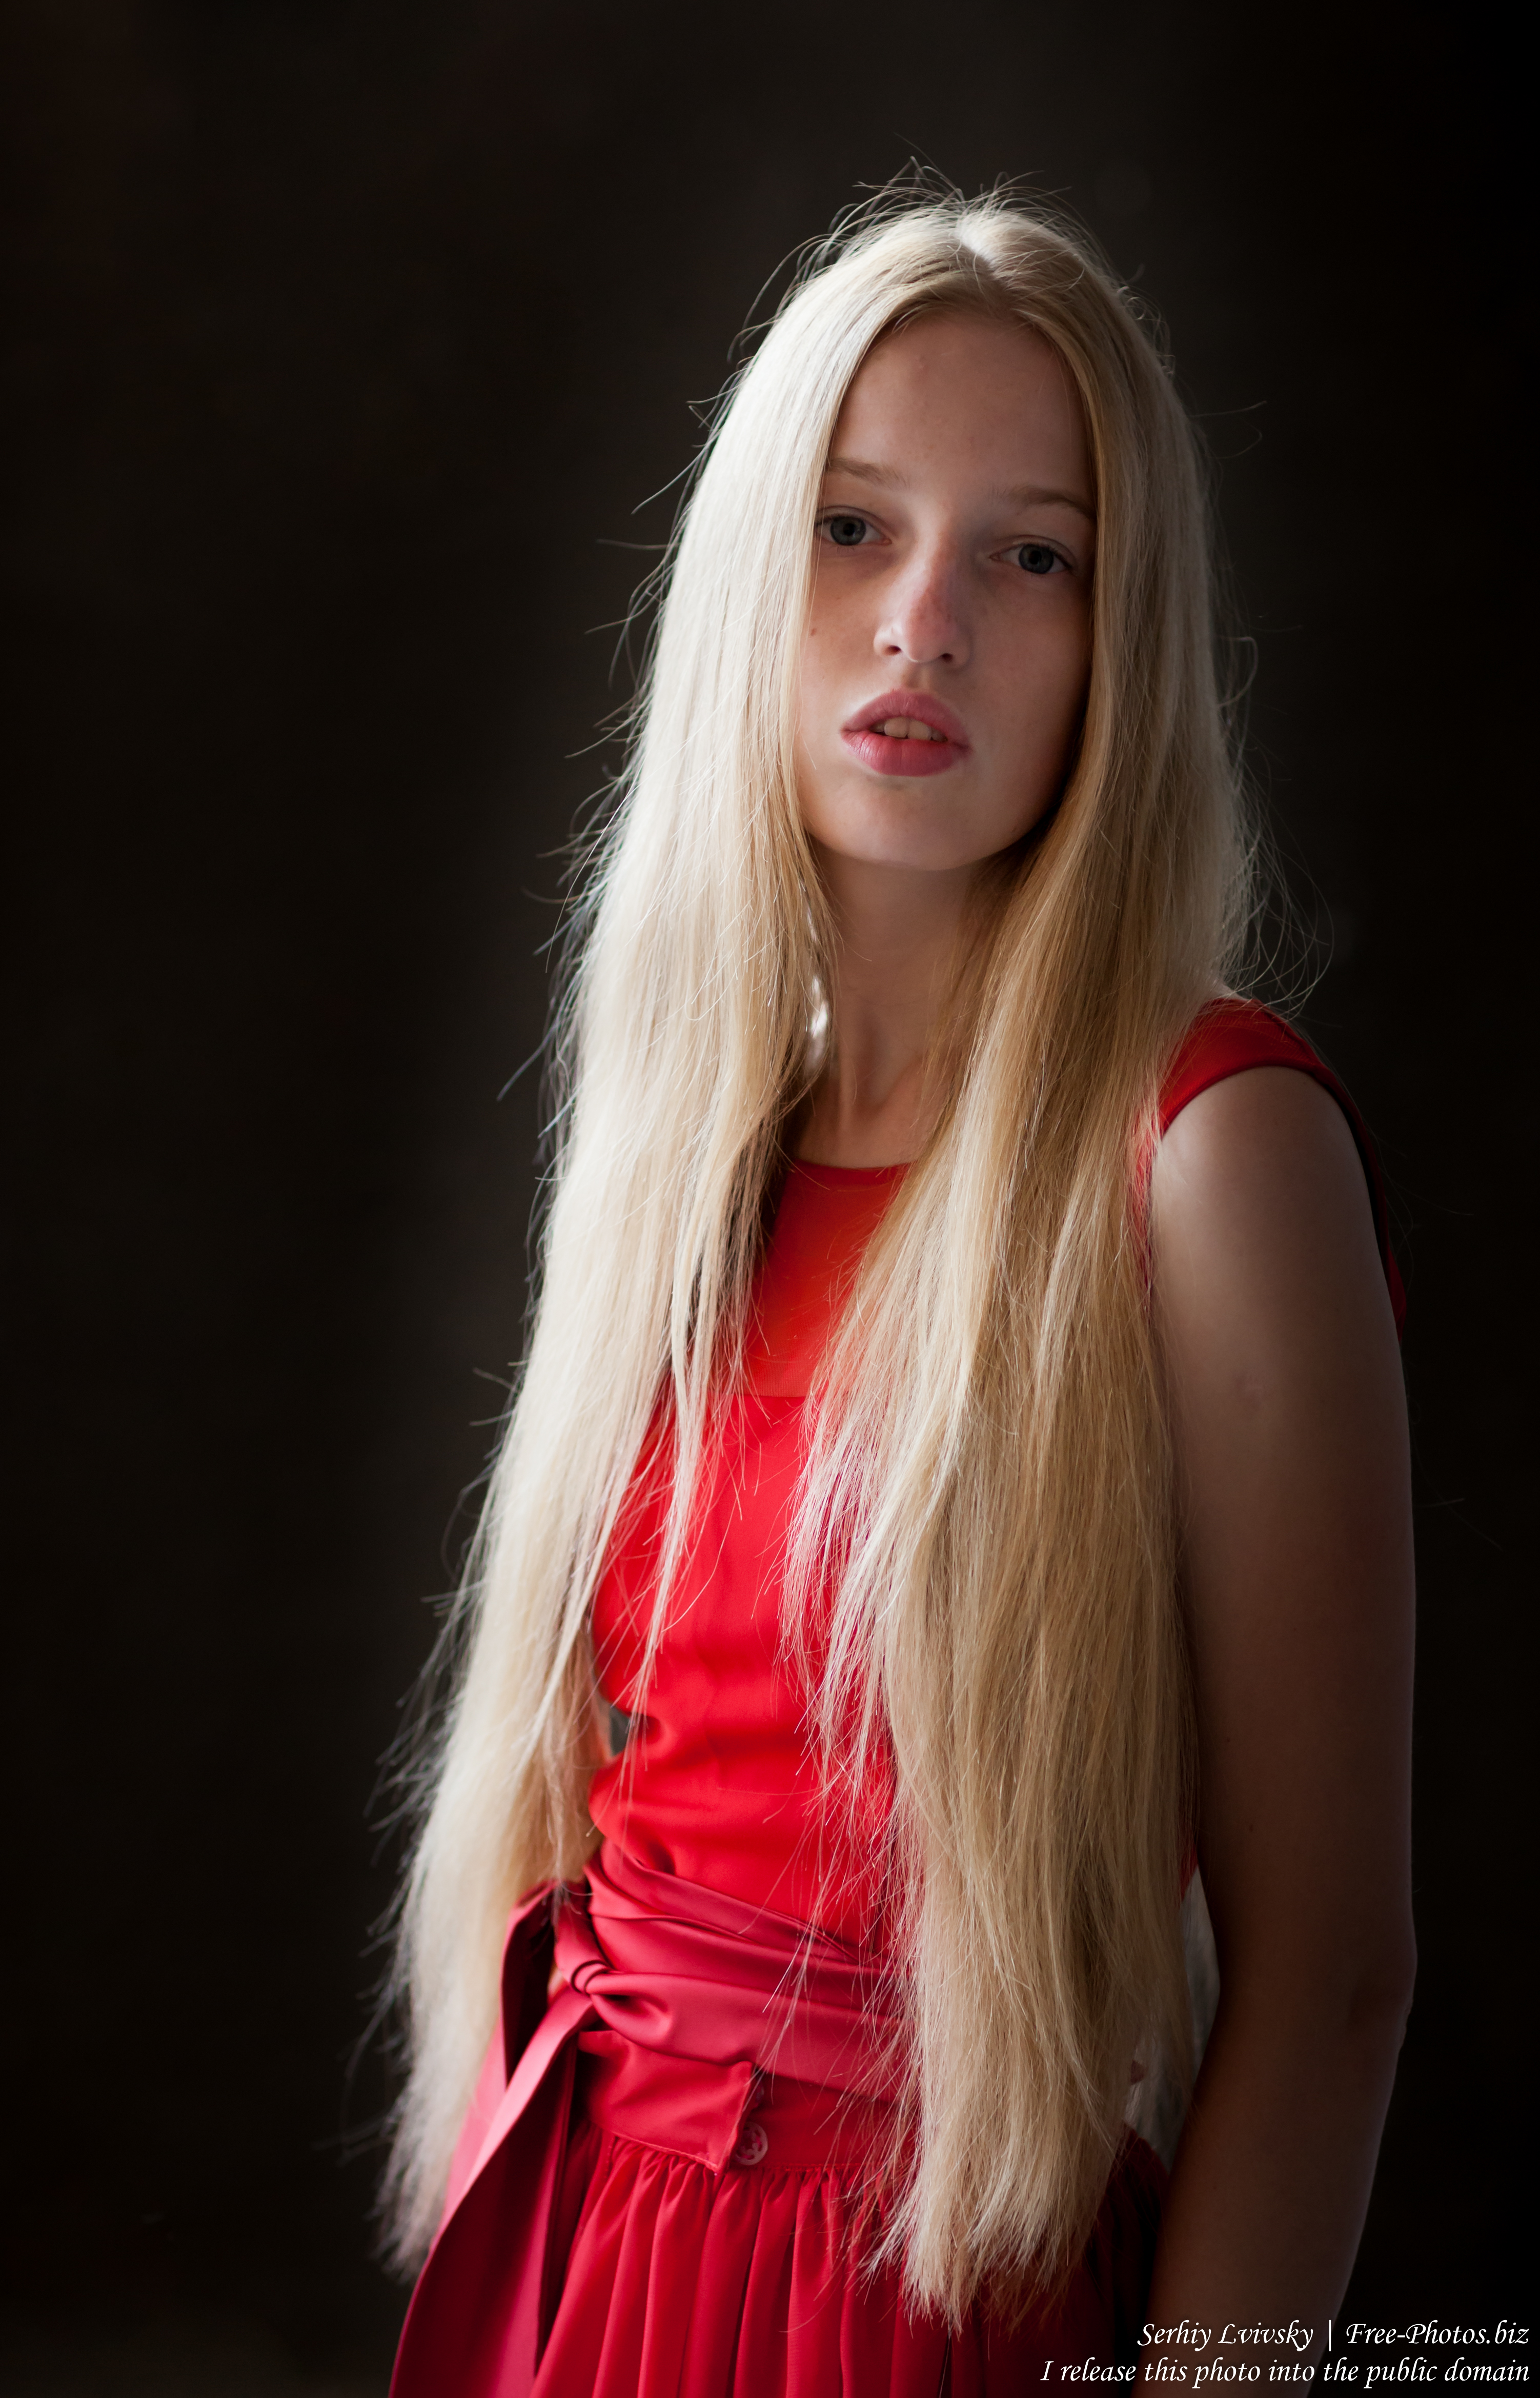 a 17-year-old Catholic natural blond girl photographed in September 2016 by Serhiy Lvivsky, picture 9